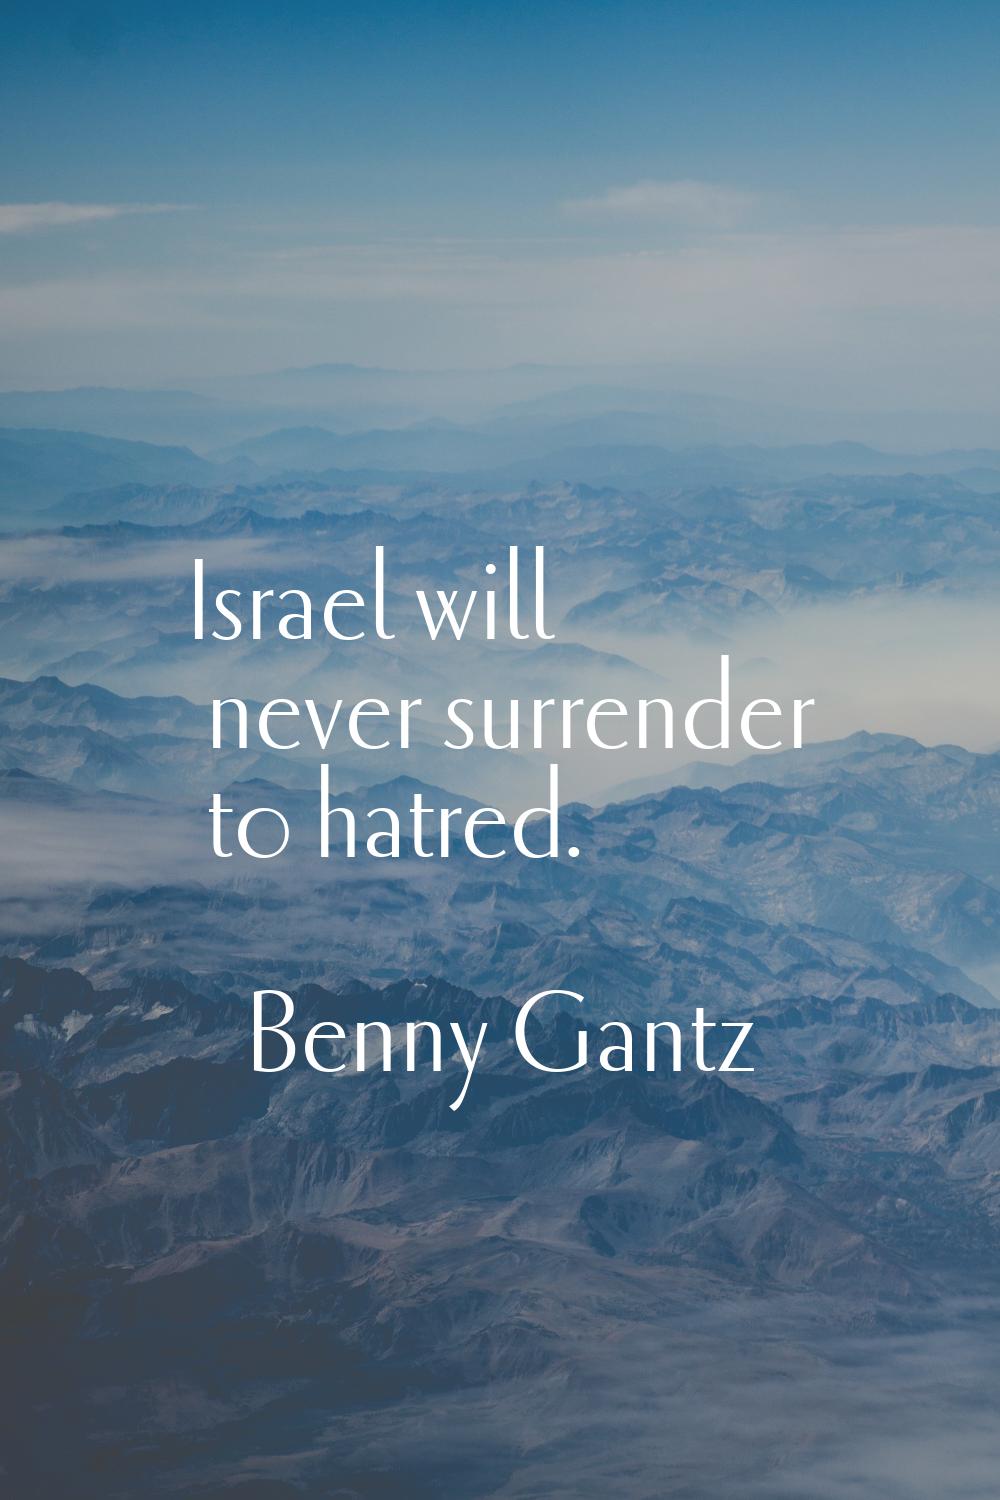 Israel will never surrender to hatred.